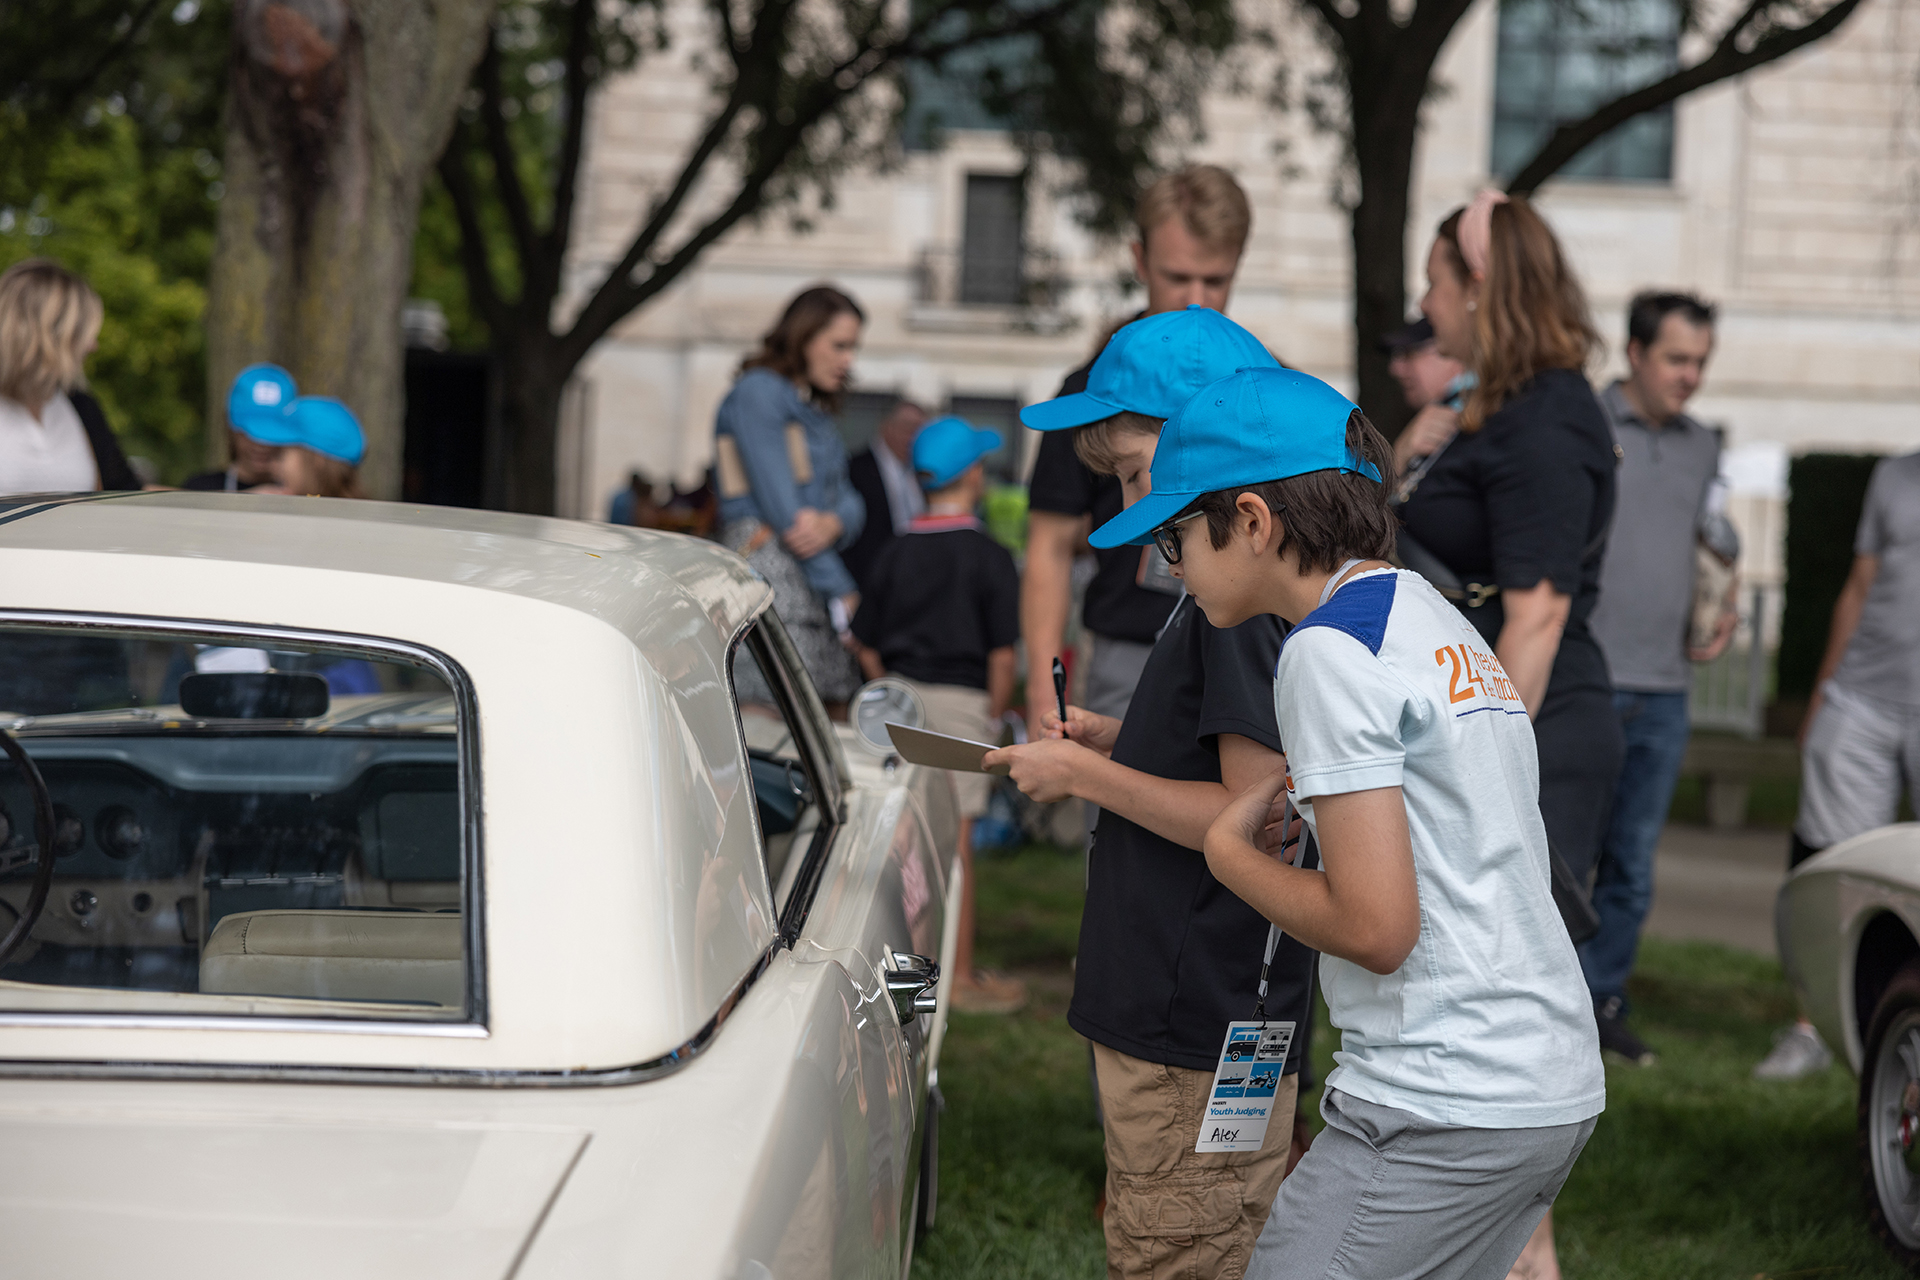 Youth Judging at the Concours d'Elegance